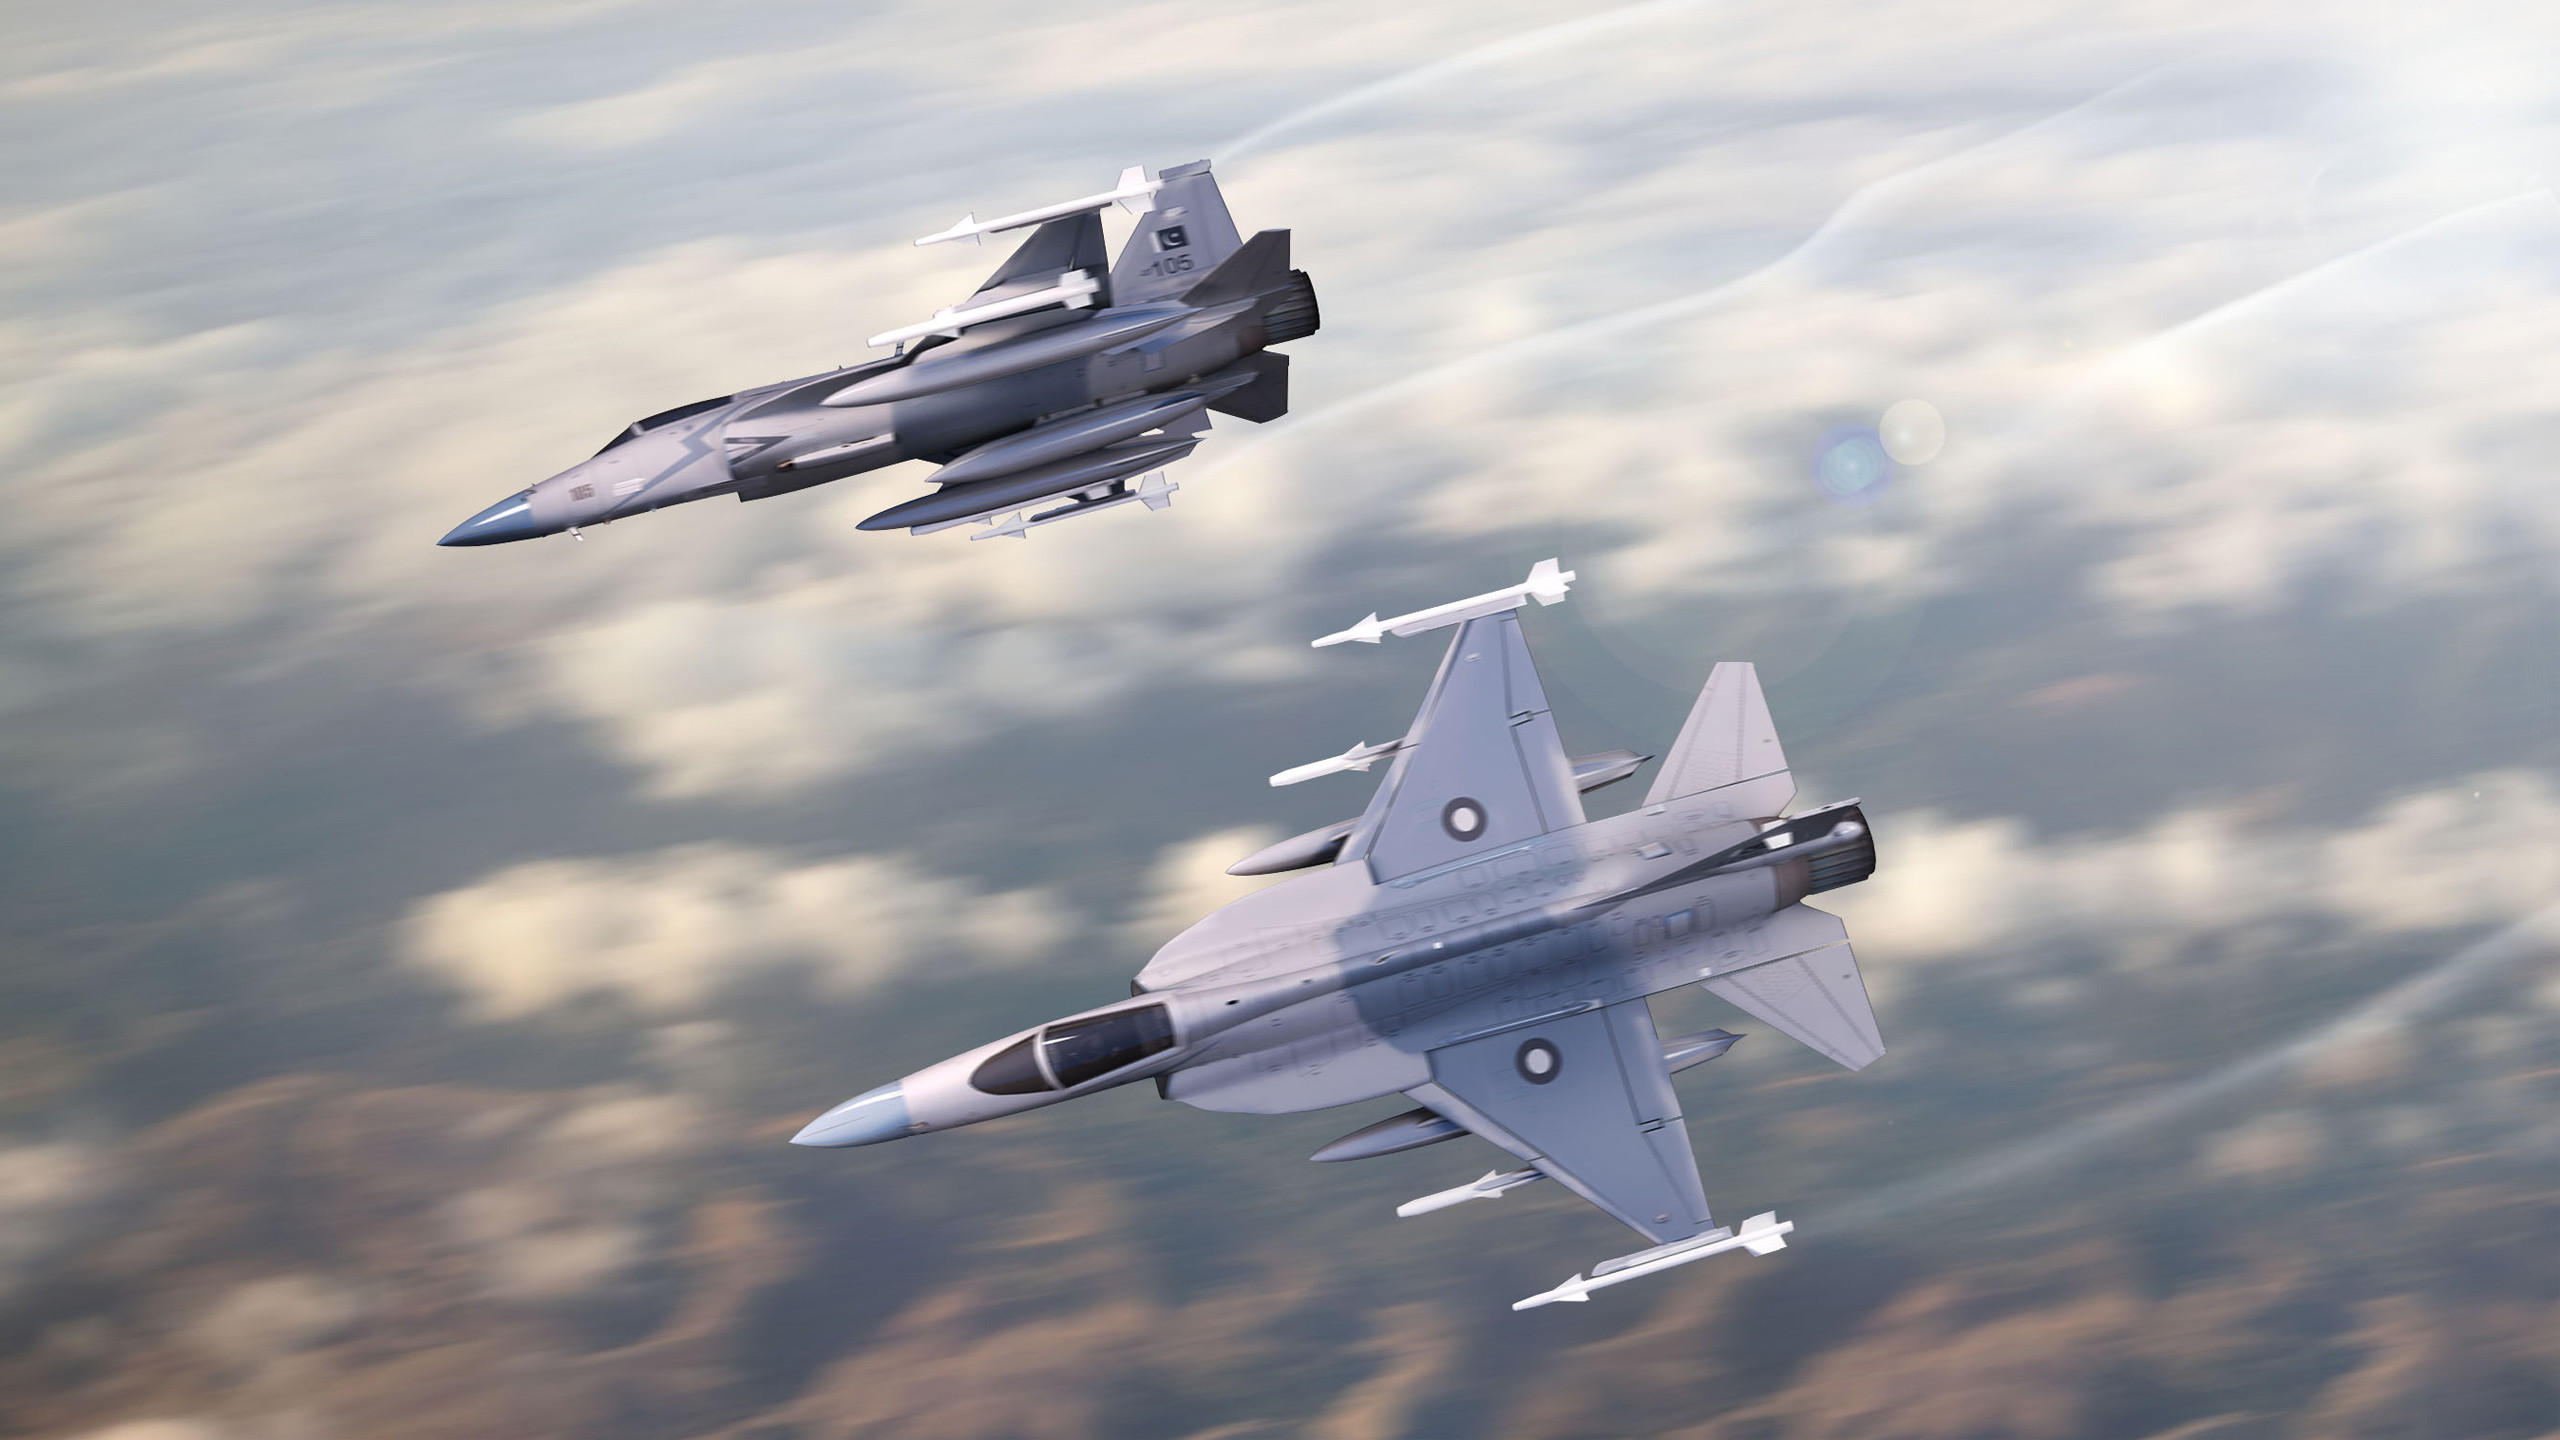 2560x1440 JF 17 Thunder Fighter aircrafts